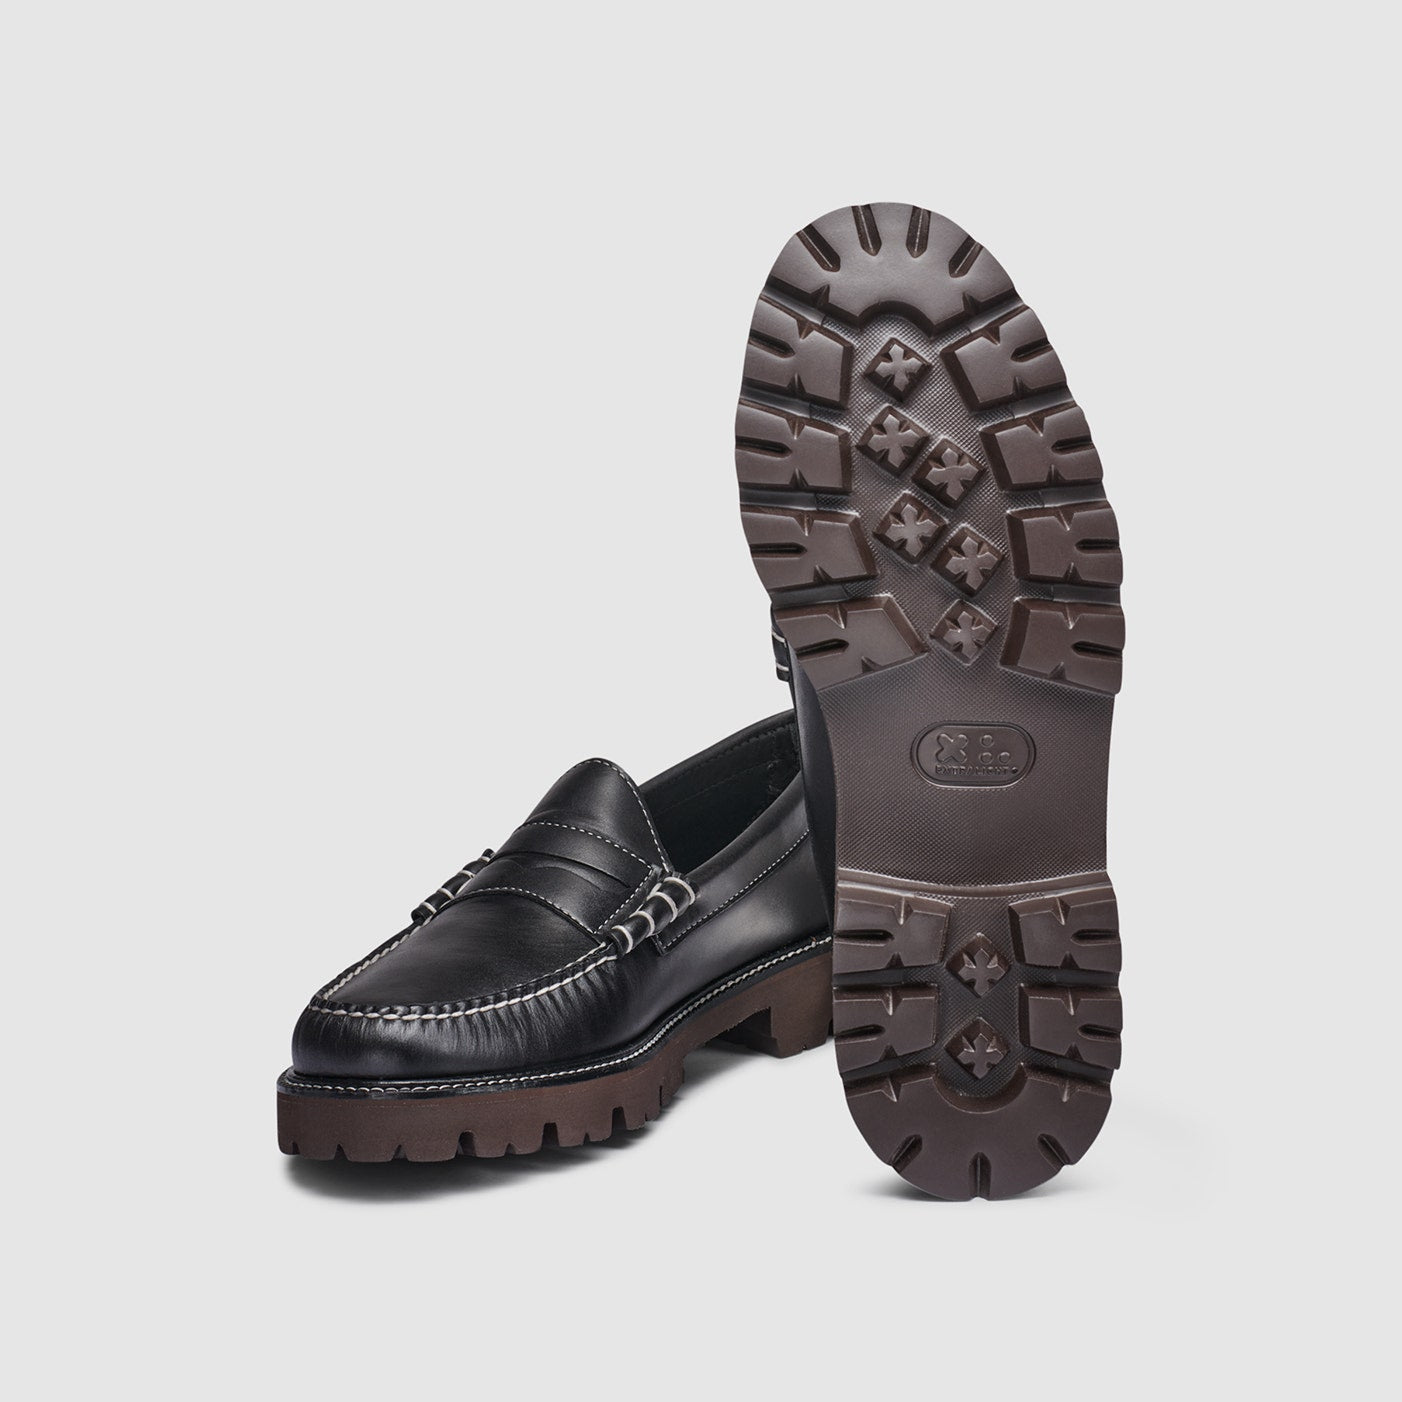 G.H. Bass Larson Softy Super Lug Weejuns Loafer in Black BAZ3W467 | Shop from eightywingold an official brand partner for G.H. Bass in Canada and US.